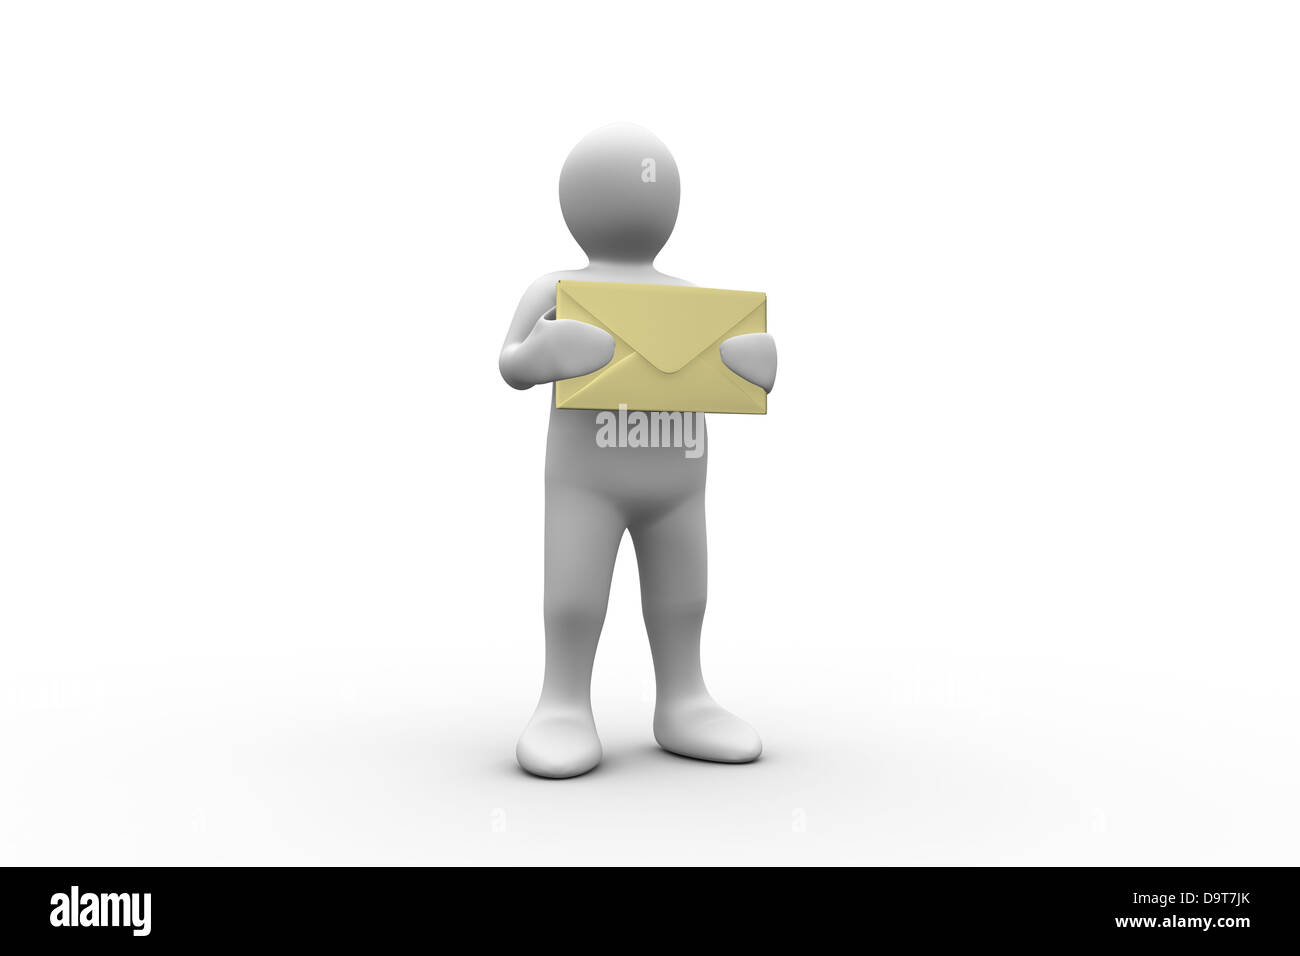 White figure holding a big brown envelope Stock Photo